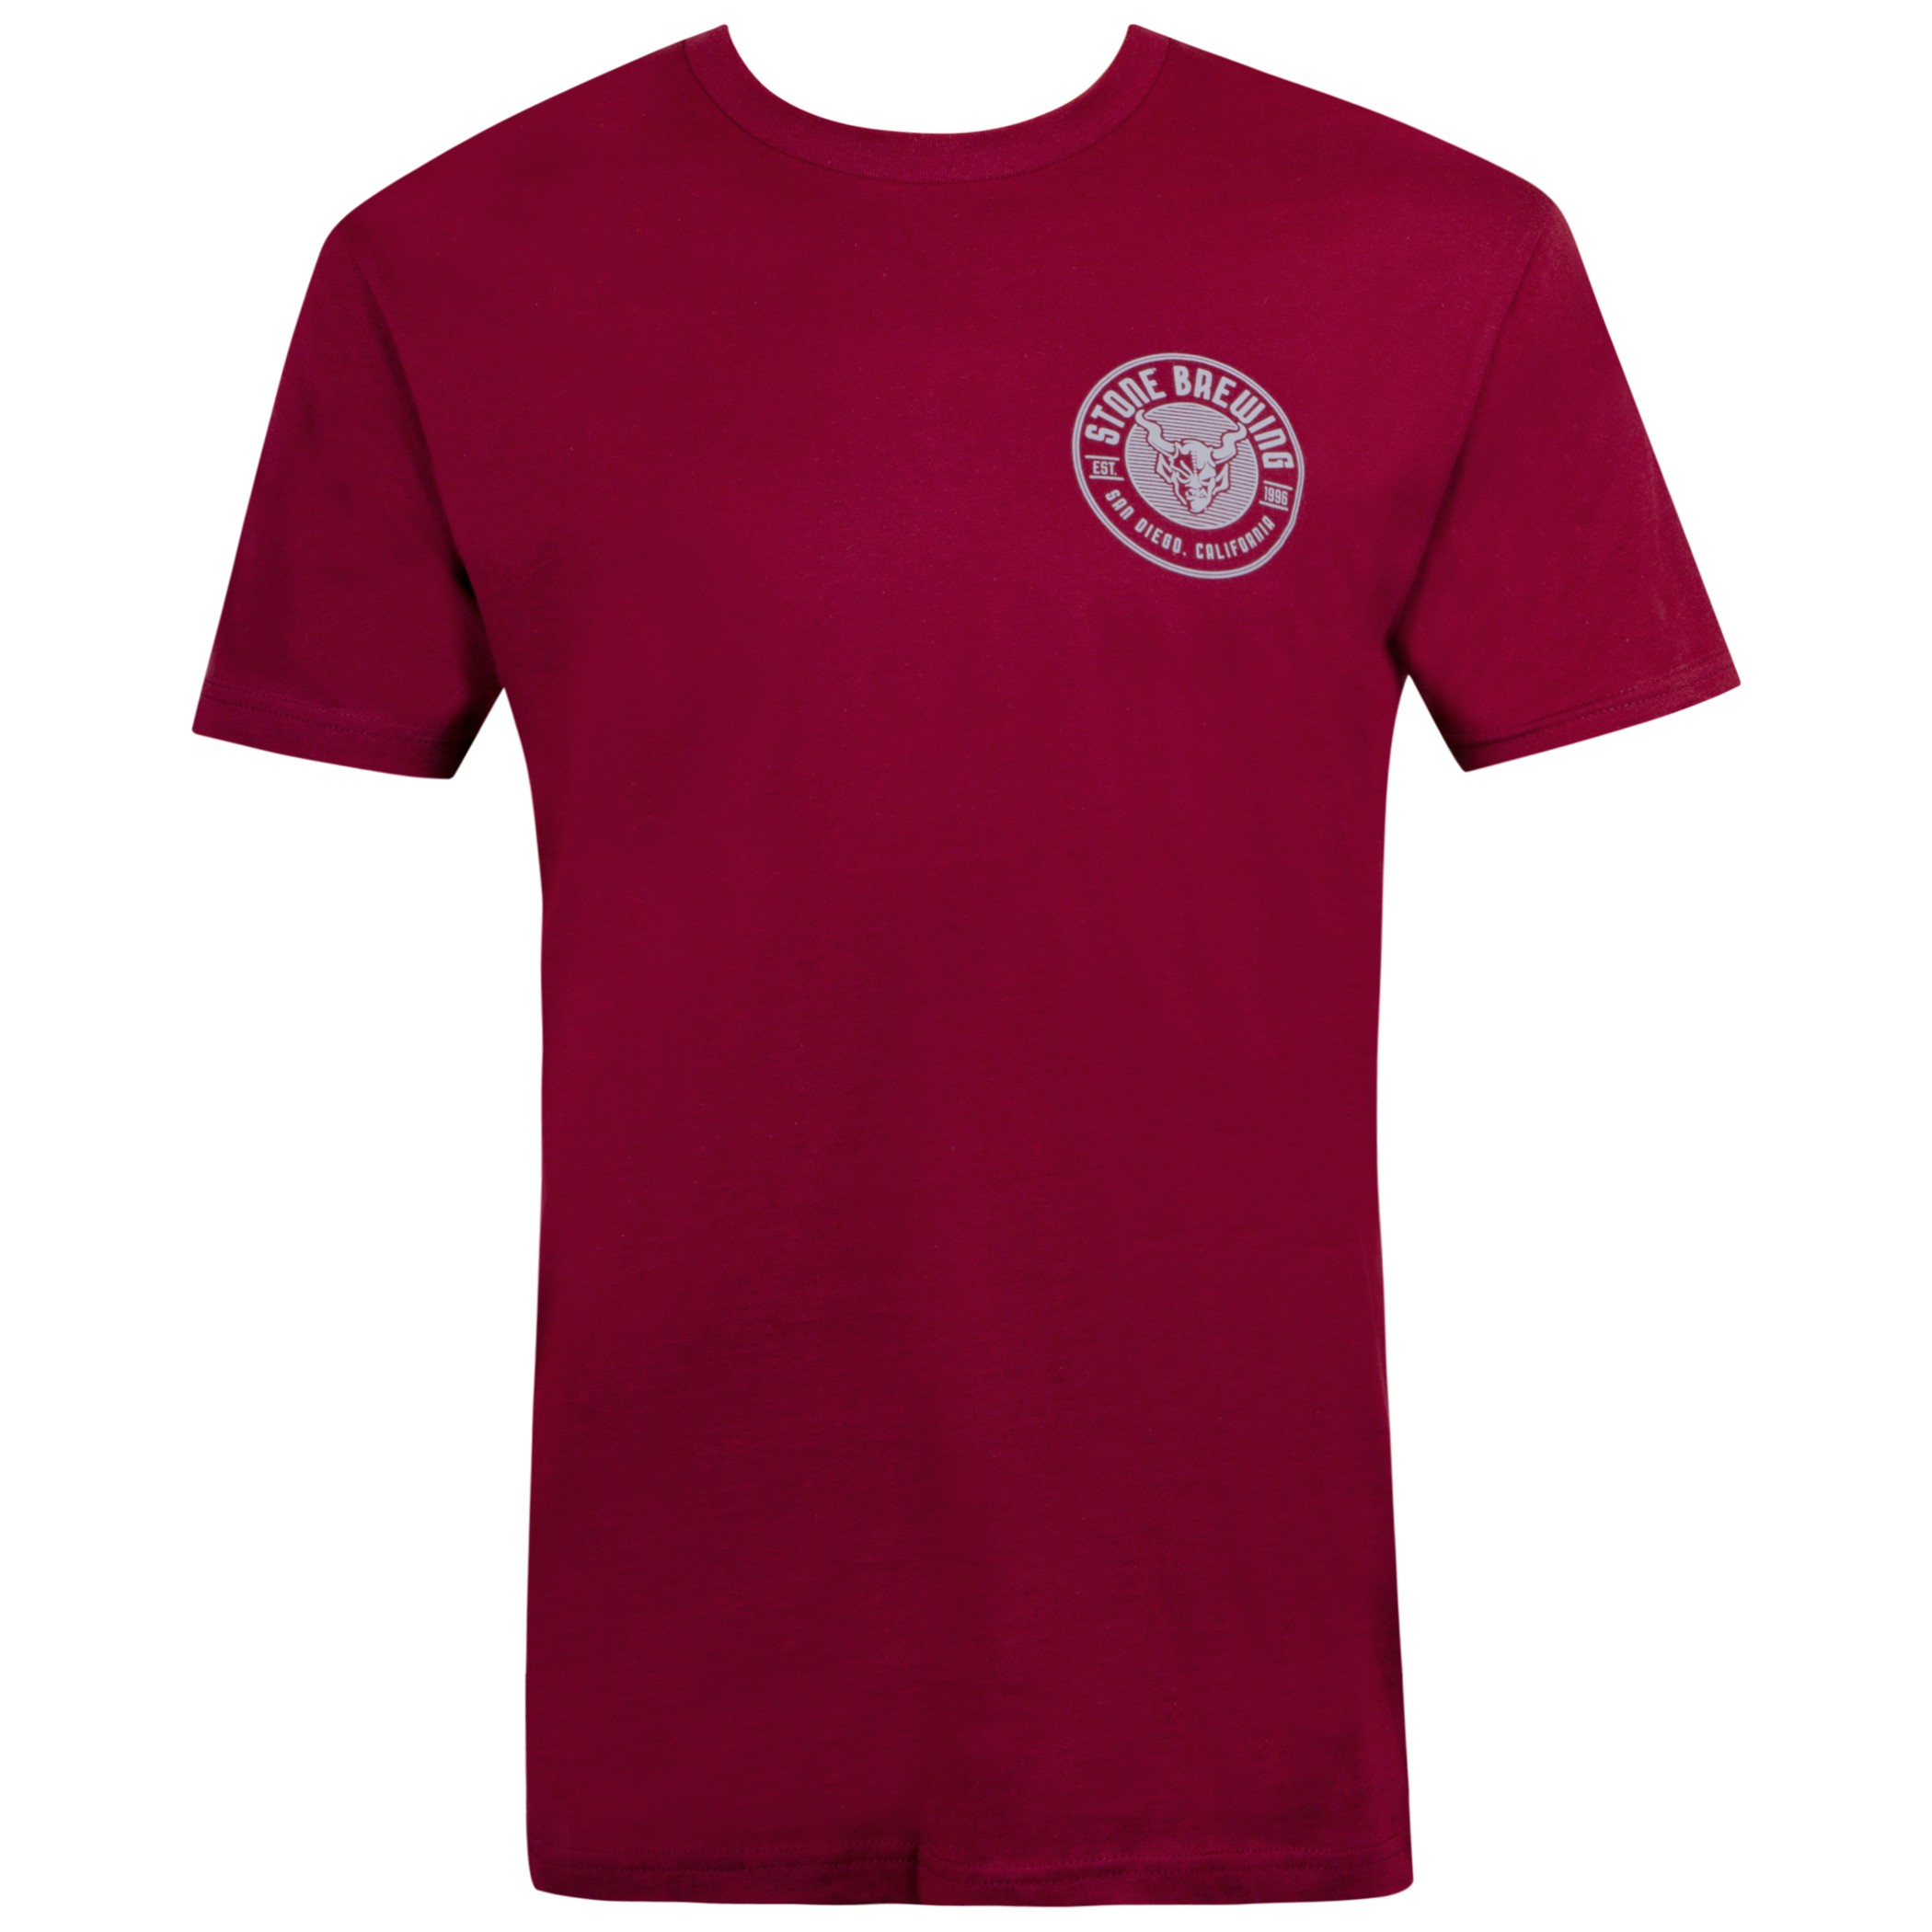 Stone Brewing Criterion Maroon Tee Shirt